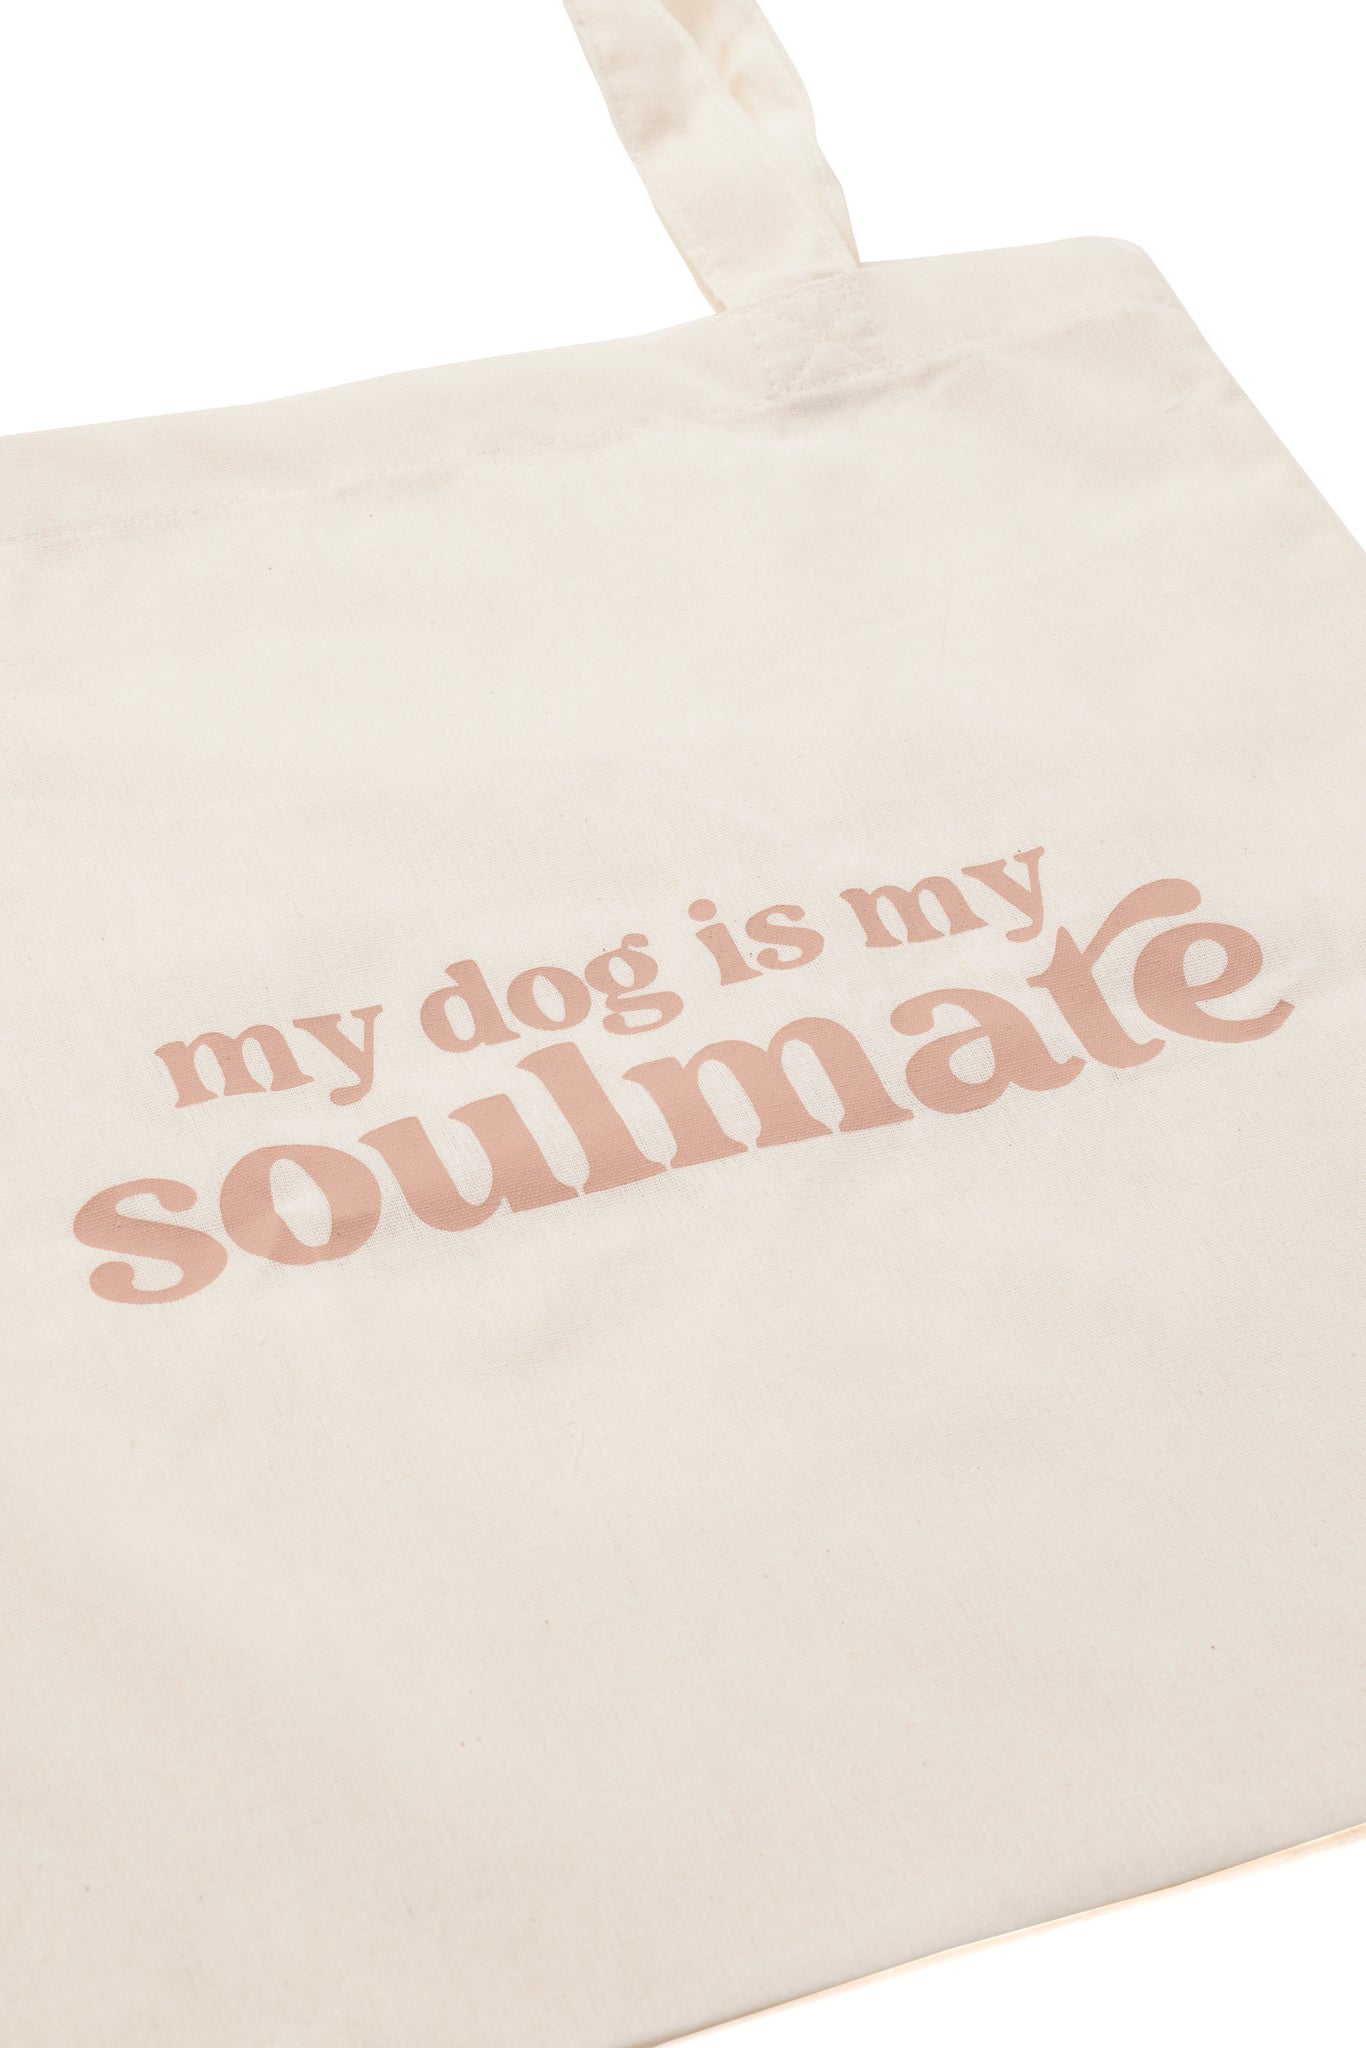 My Dog Is My Soulmate Tote Bag Detail - The Paws